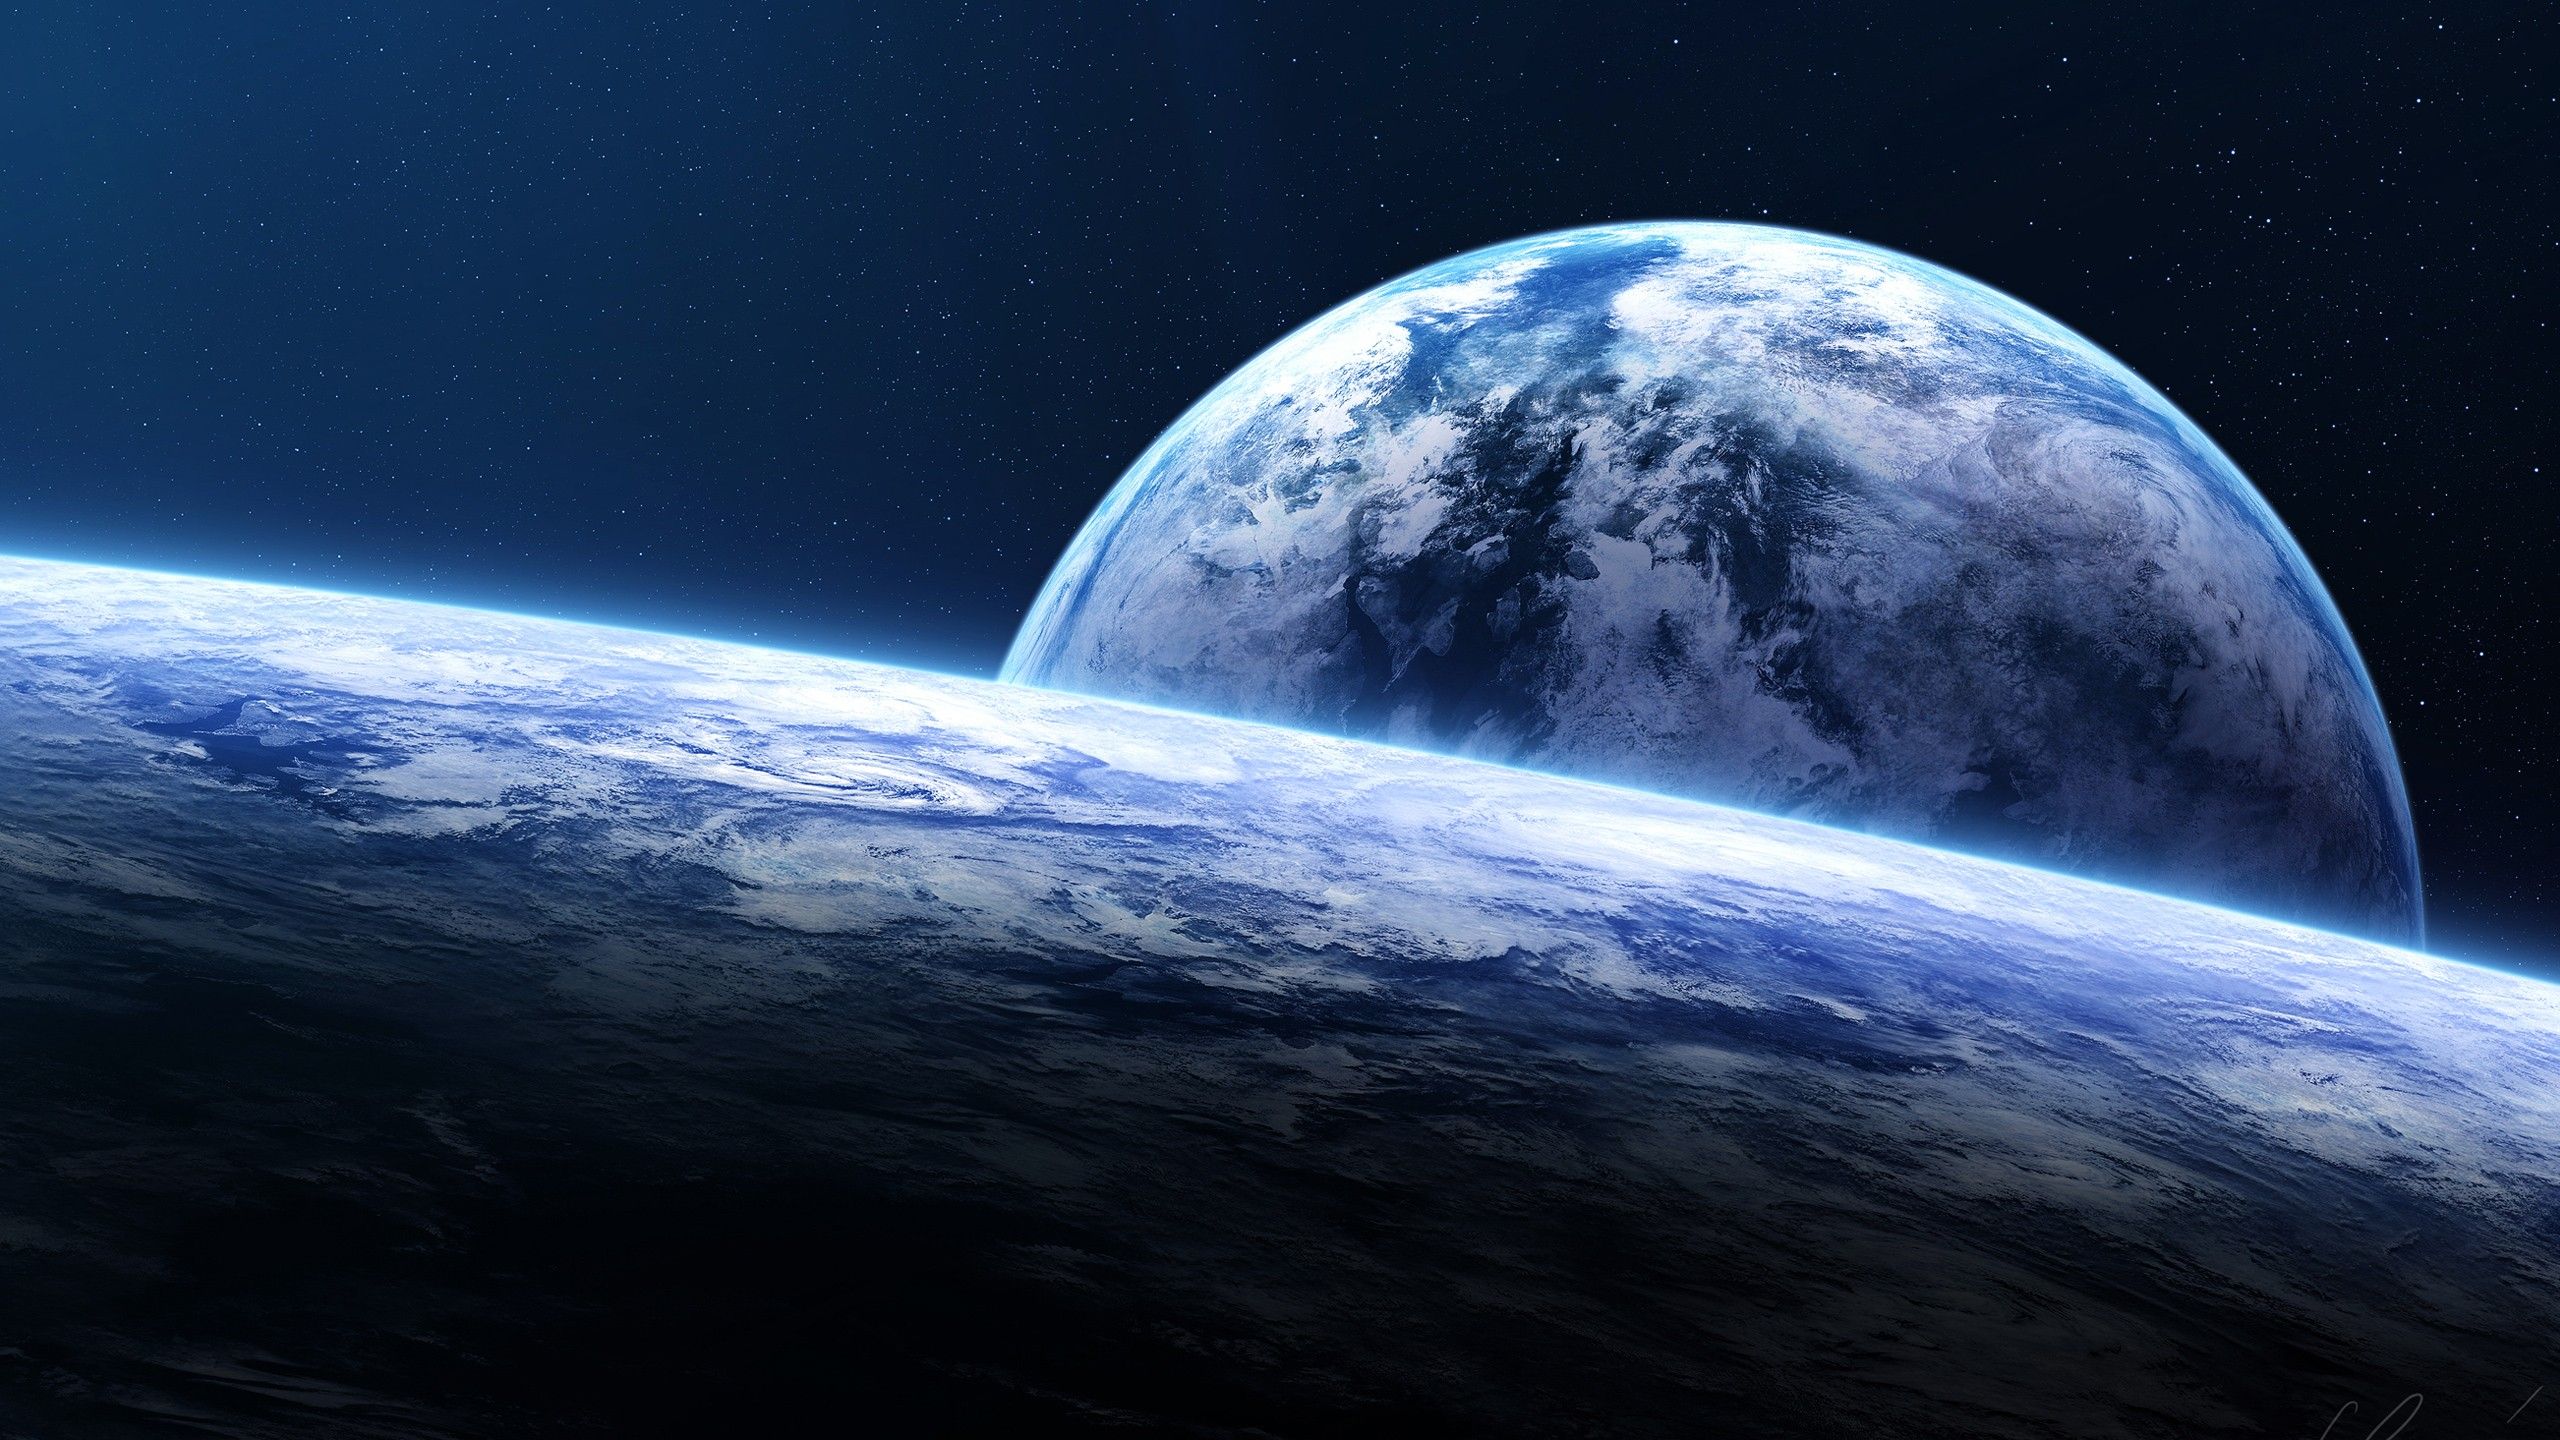 Earth 4K wallpaper for your desktop or mobile screen free and easy to download